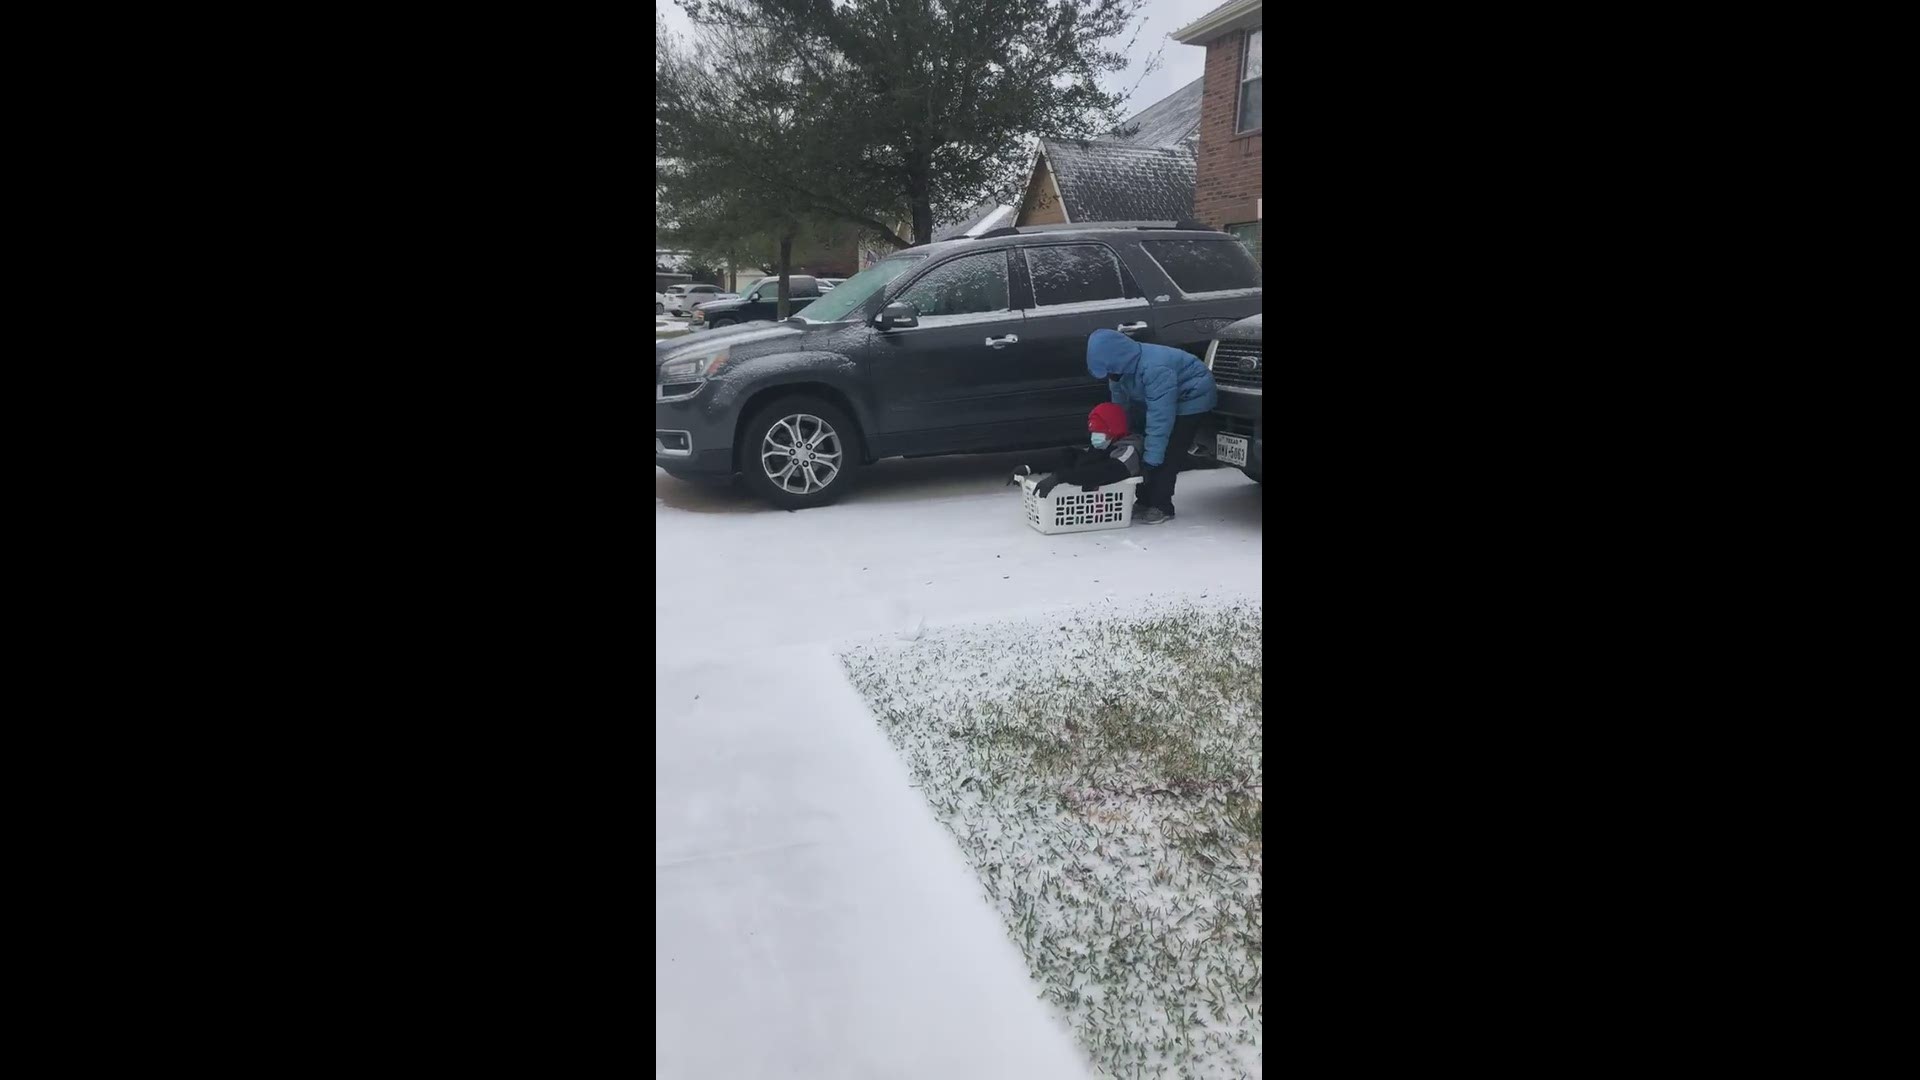 No sled? No problem! Family in Deer Park uses laundry basket for sledding.
Credit: Alicia Green